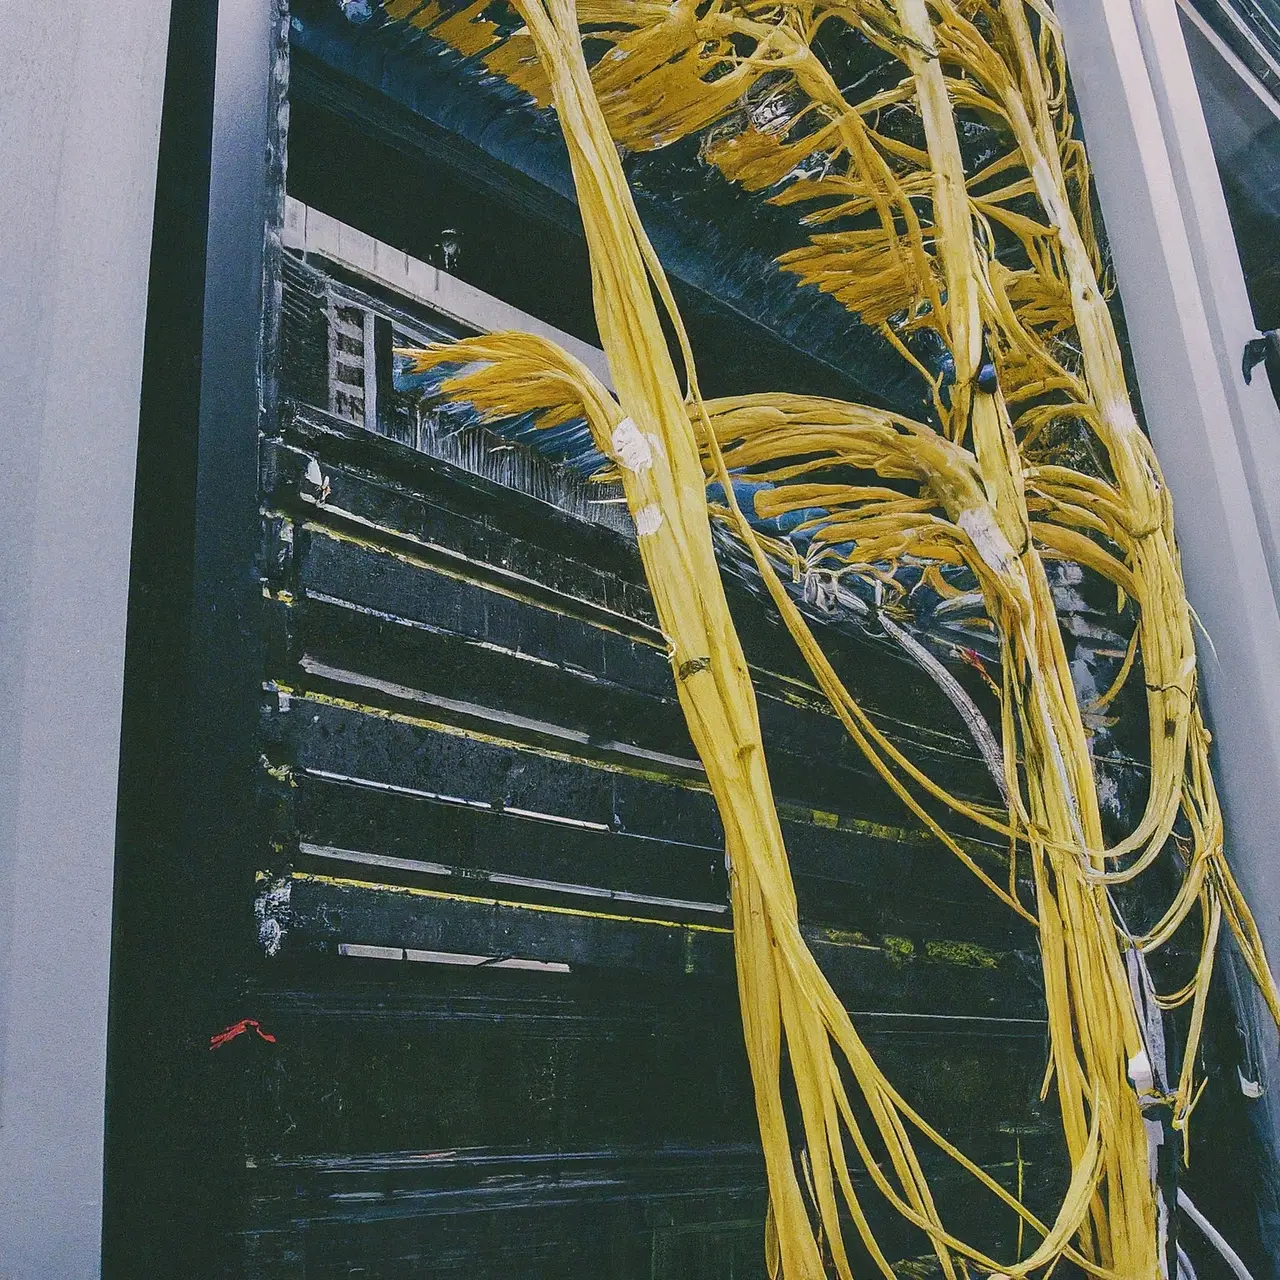 Servers and network cables in a modern data center. 35mm stock photo